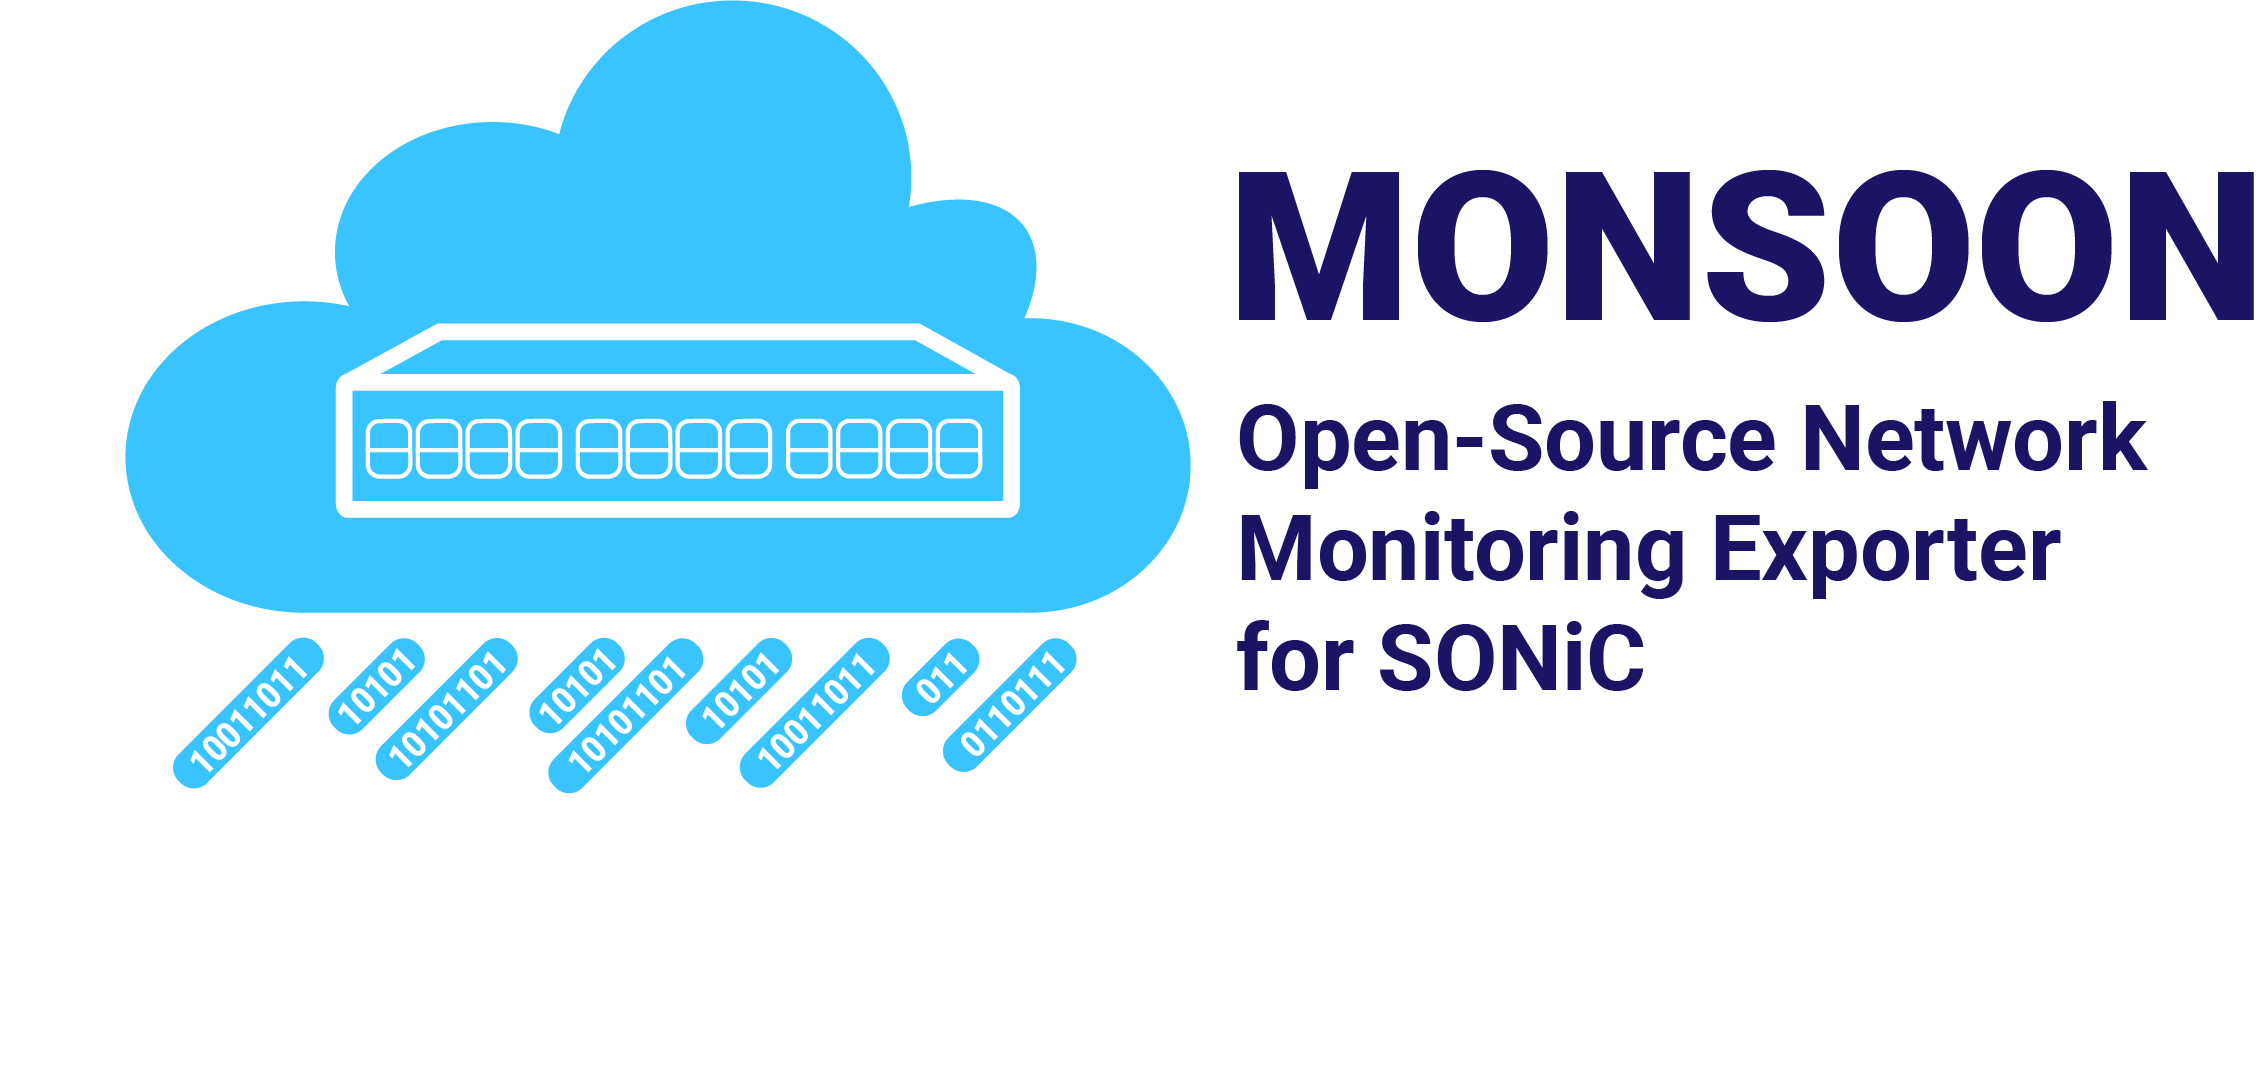 STORDIS release MONSOON Open-Source Network Monitoring Exporter for SONiC